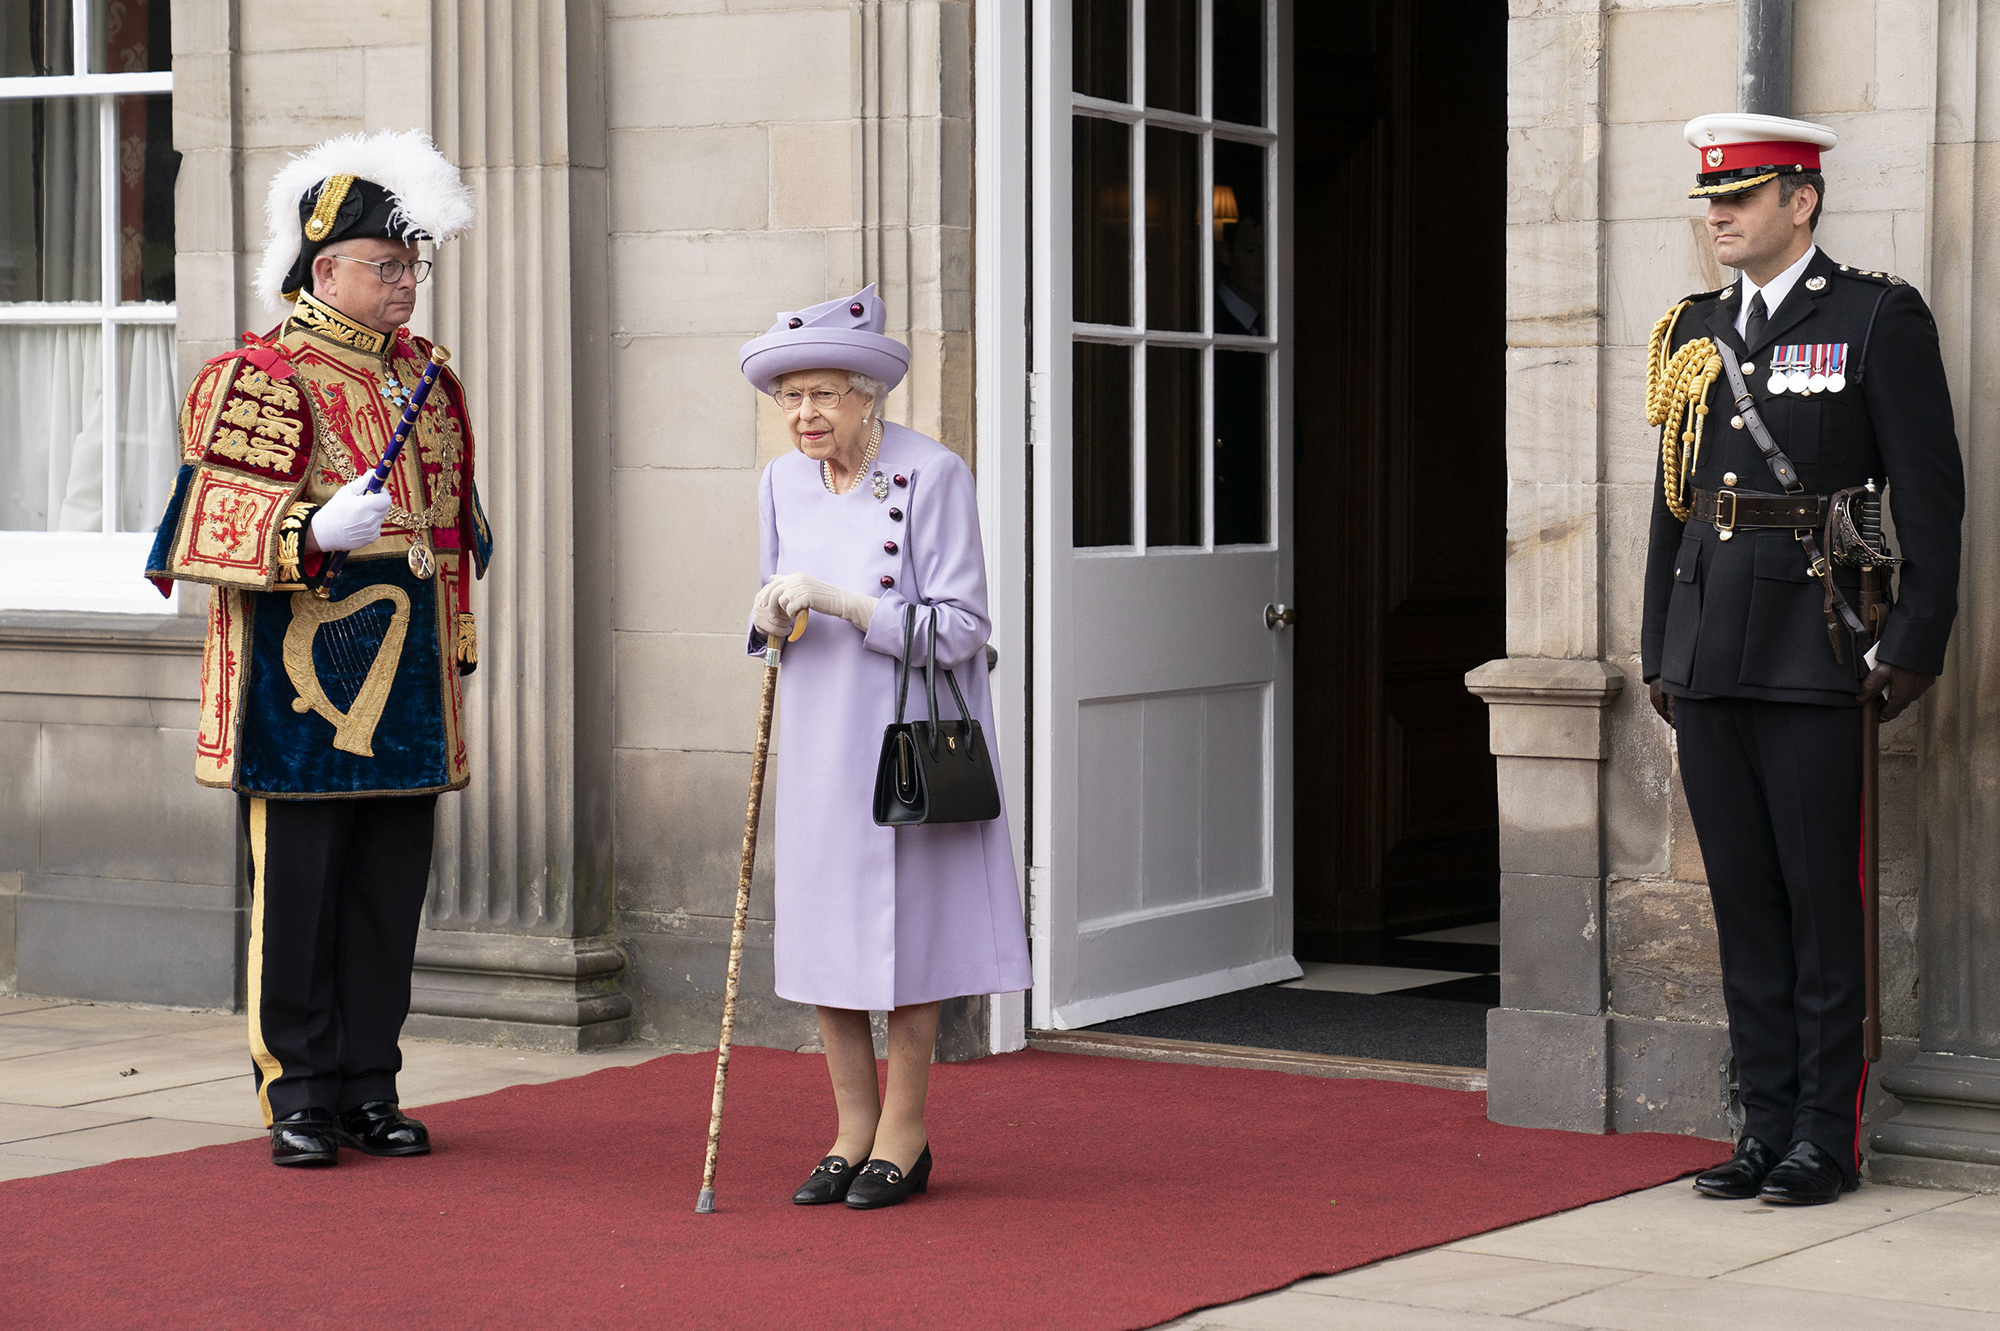 Queen Elizabeth standing on a red carpet holding a cane surrounded by two guards.